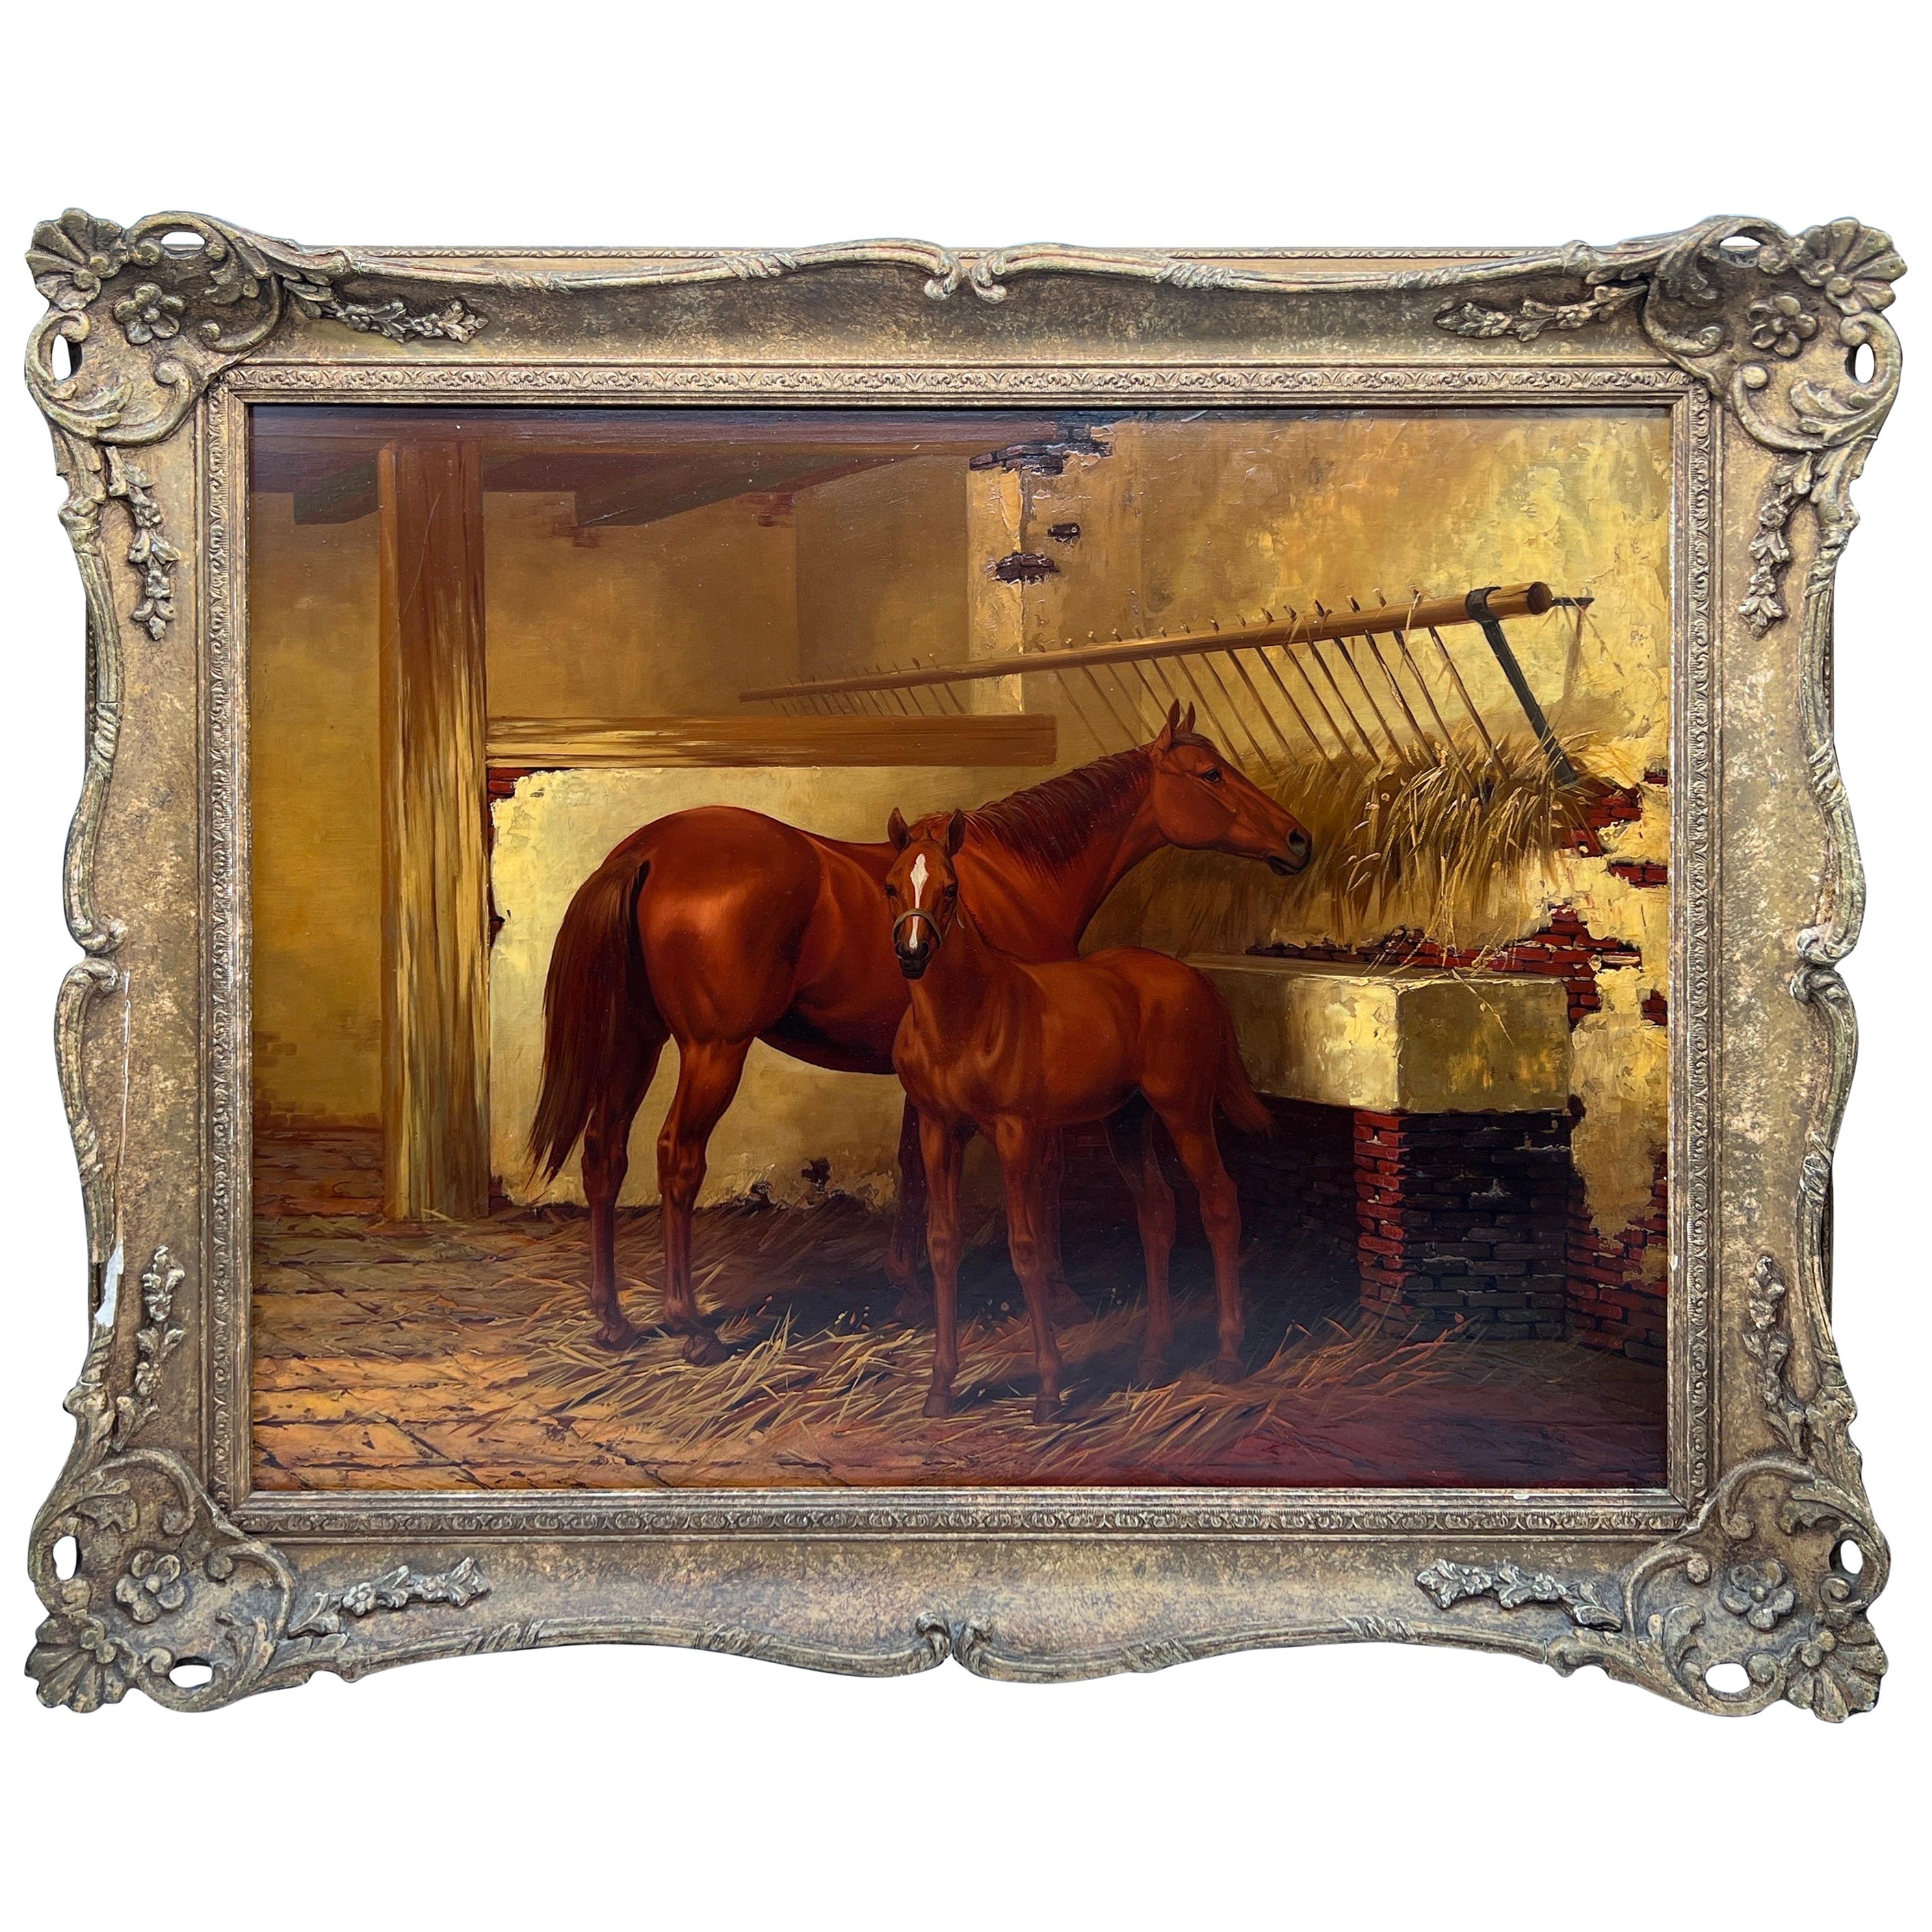 Superb Quality - Antique Equestrian Mare & Foal Stable Painting Illegibly Signed For Sale